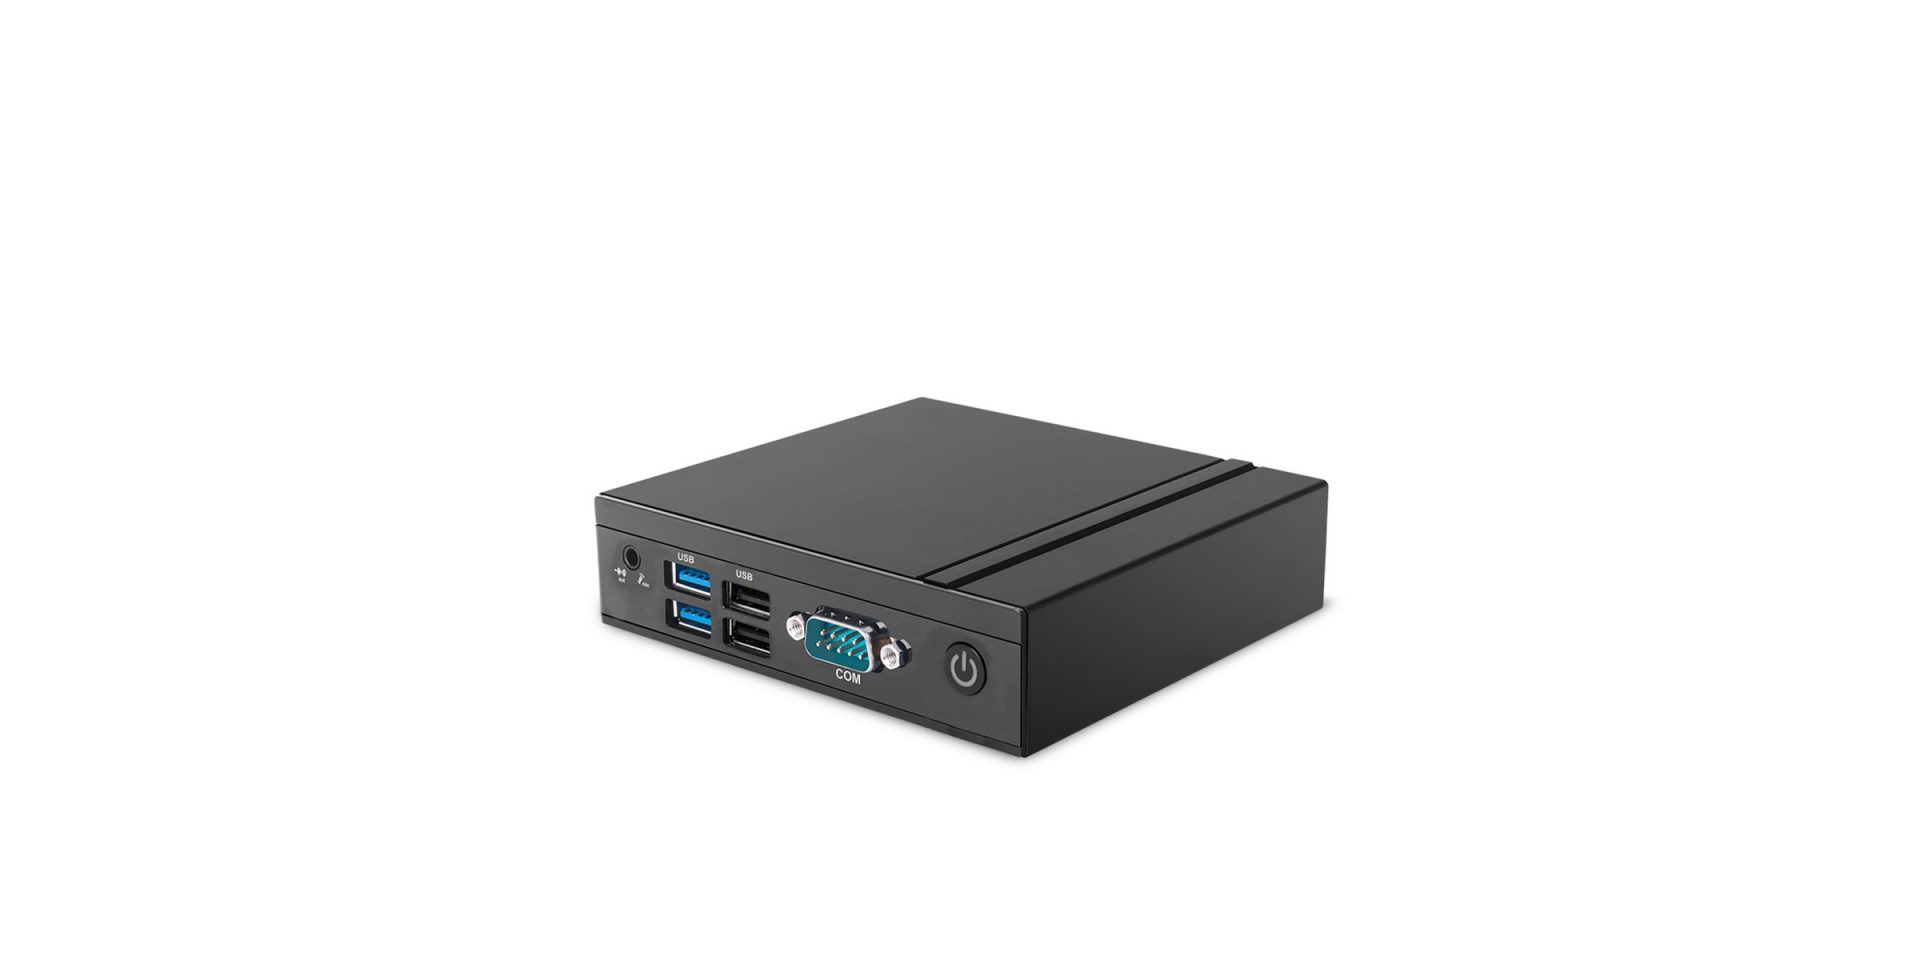 nsign.tv Player M - 2 GB RAM - 32 GB storage - Android 11 - Plug & Play - Black - no nsign licence included